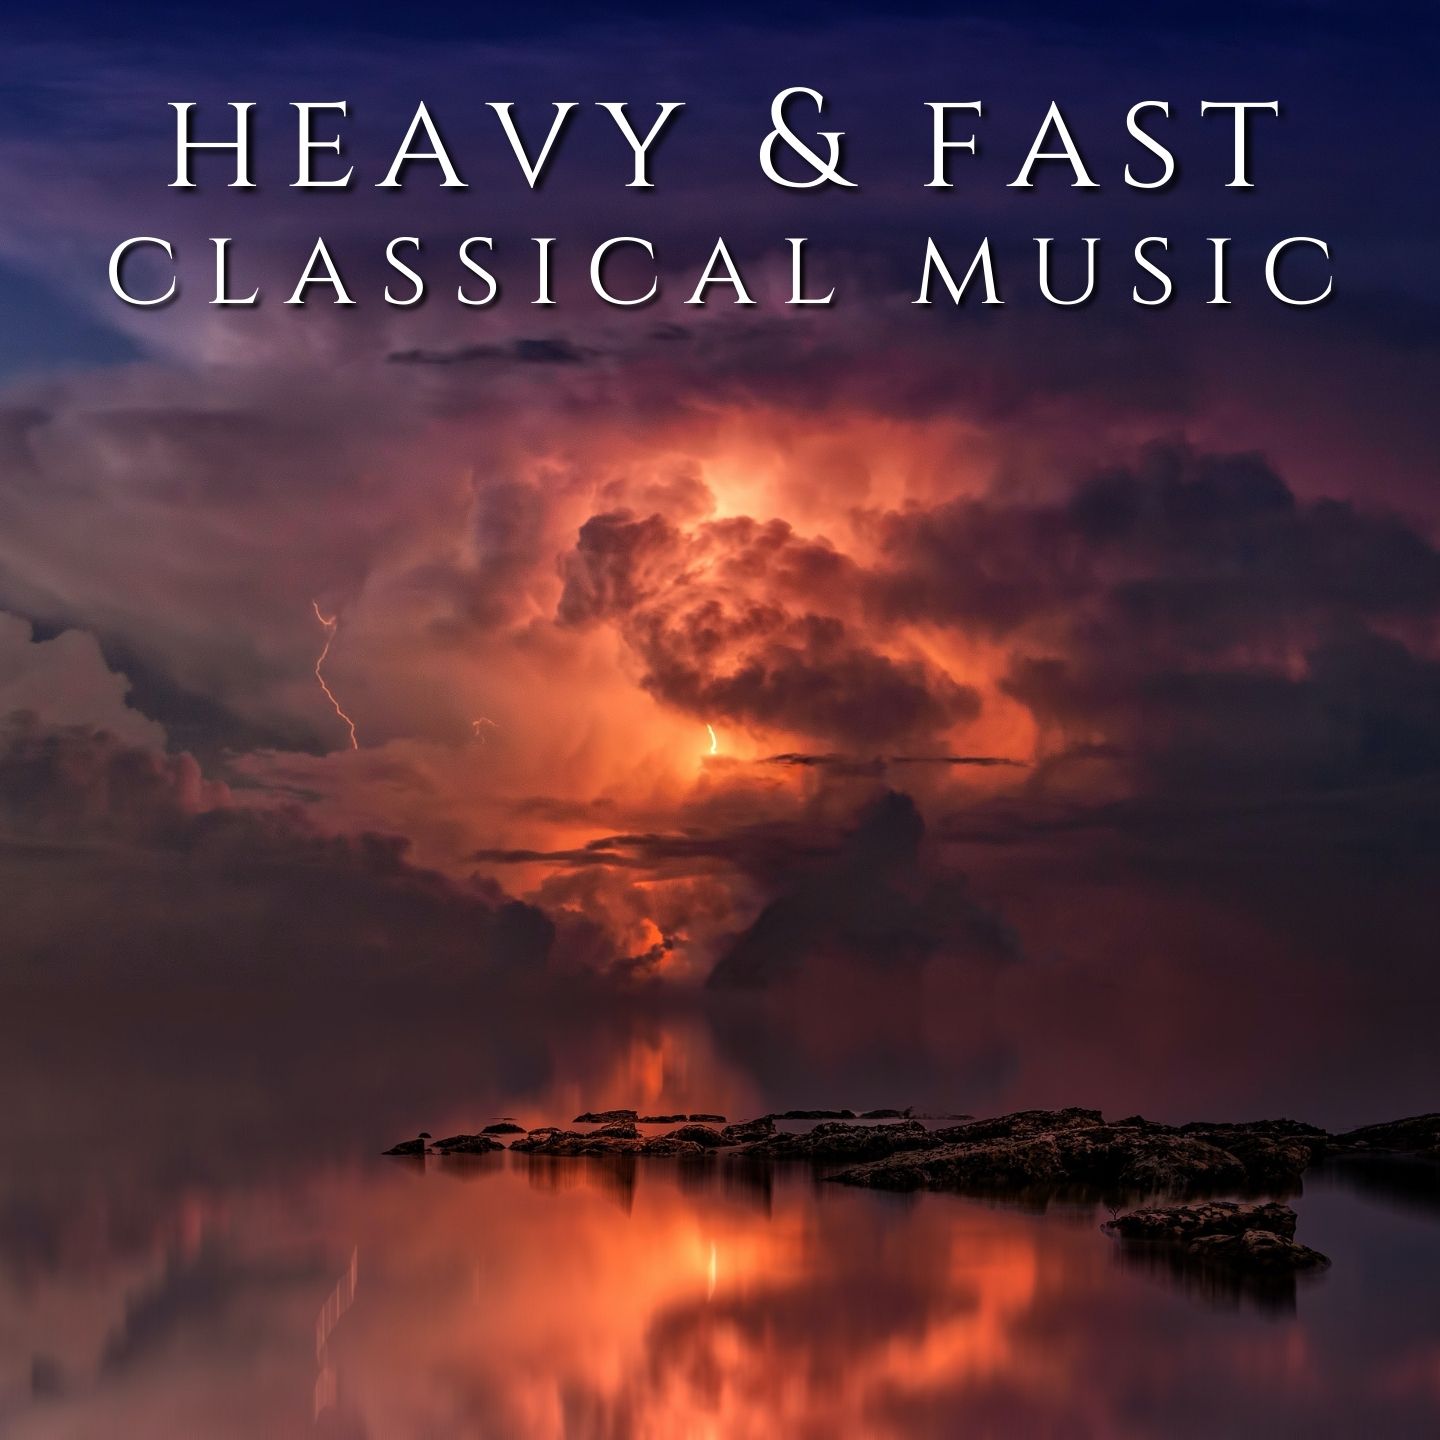 Fast, Heavy Classical Music